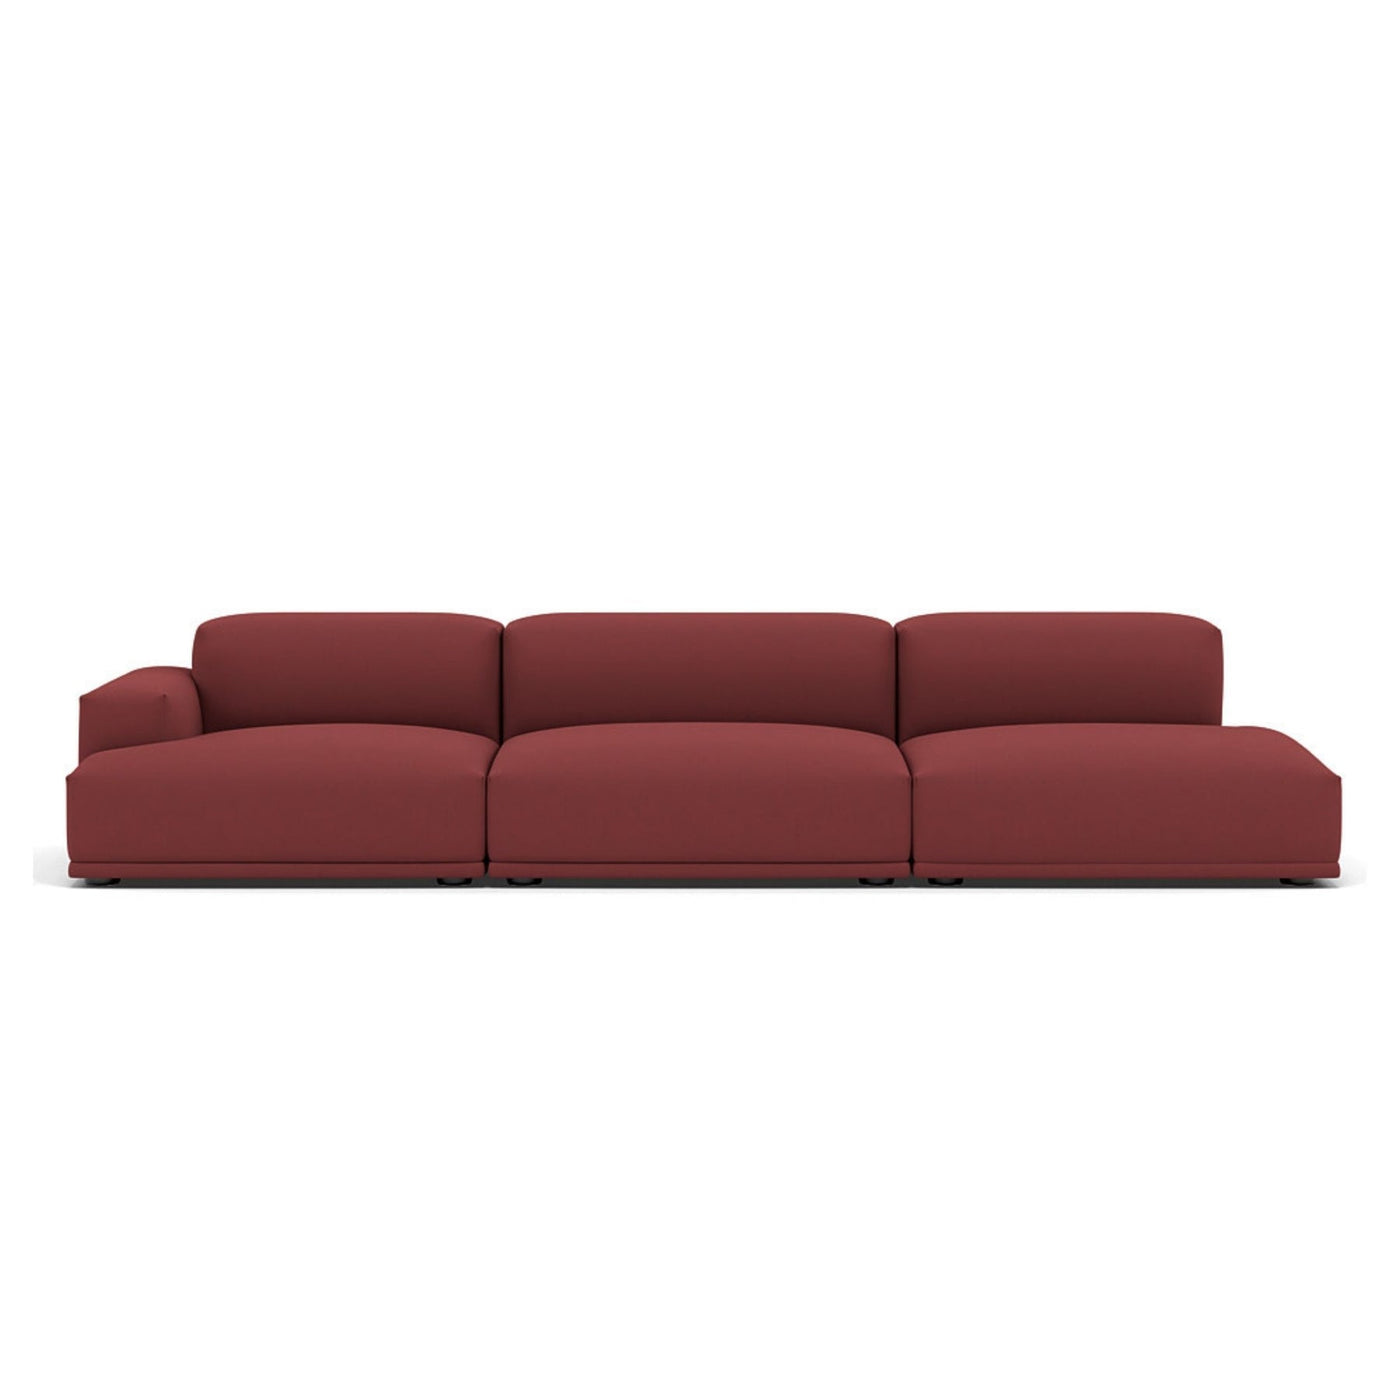 Muuto Connect modular sofa 3 seater in configuration 2. Made to order from someday designs. #colour_rime-591